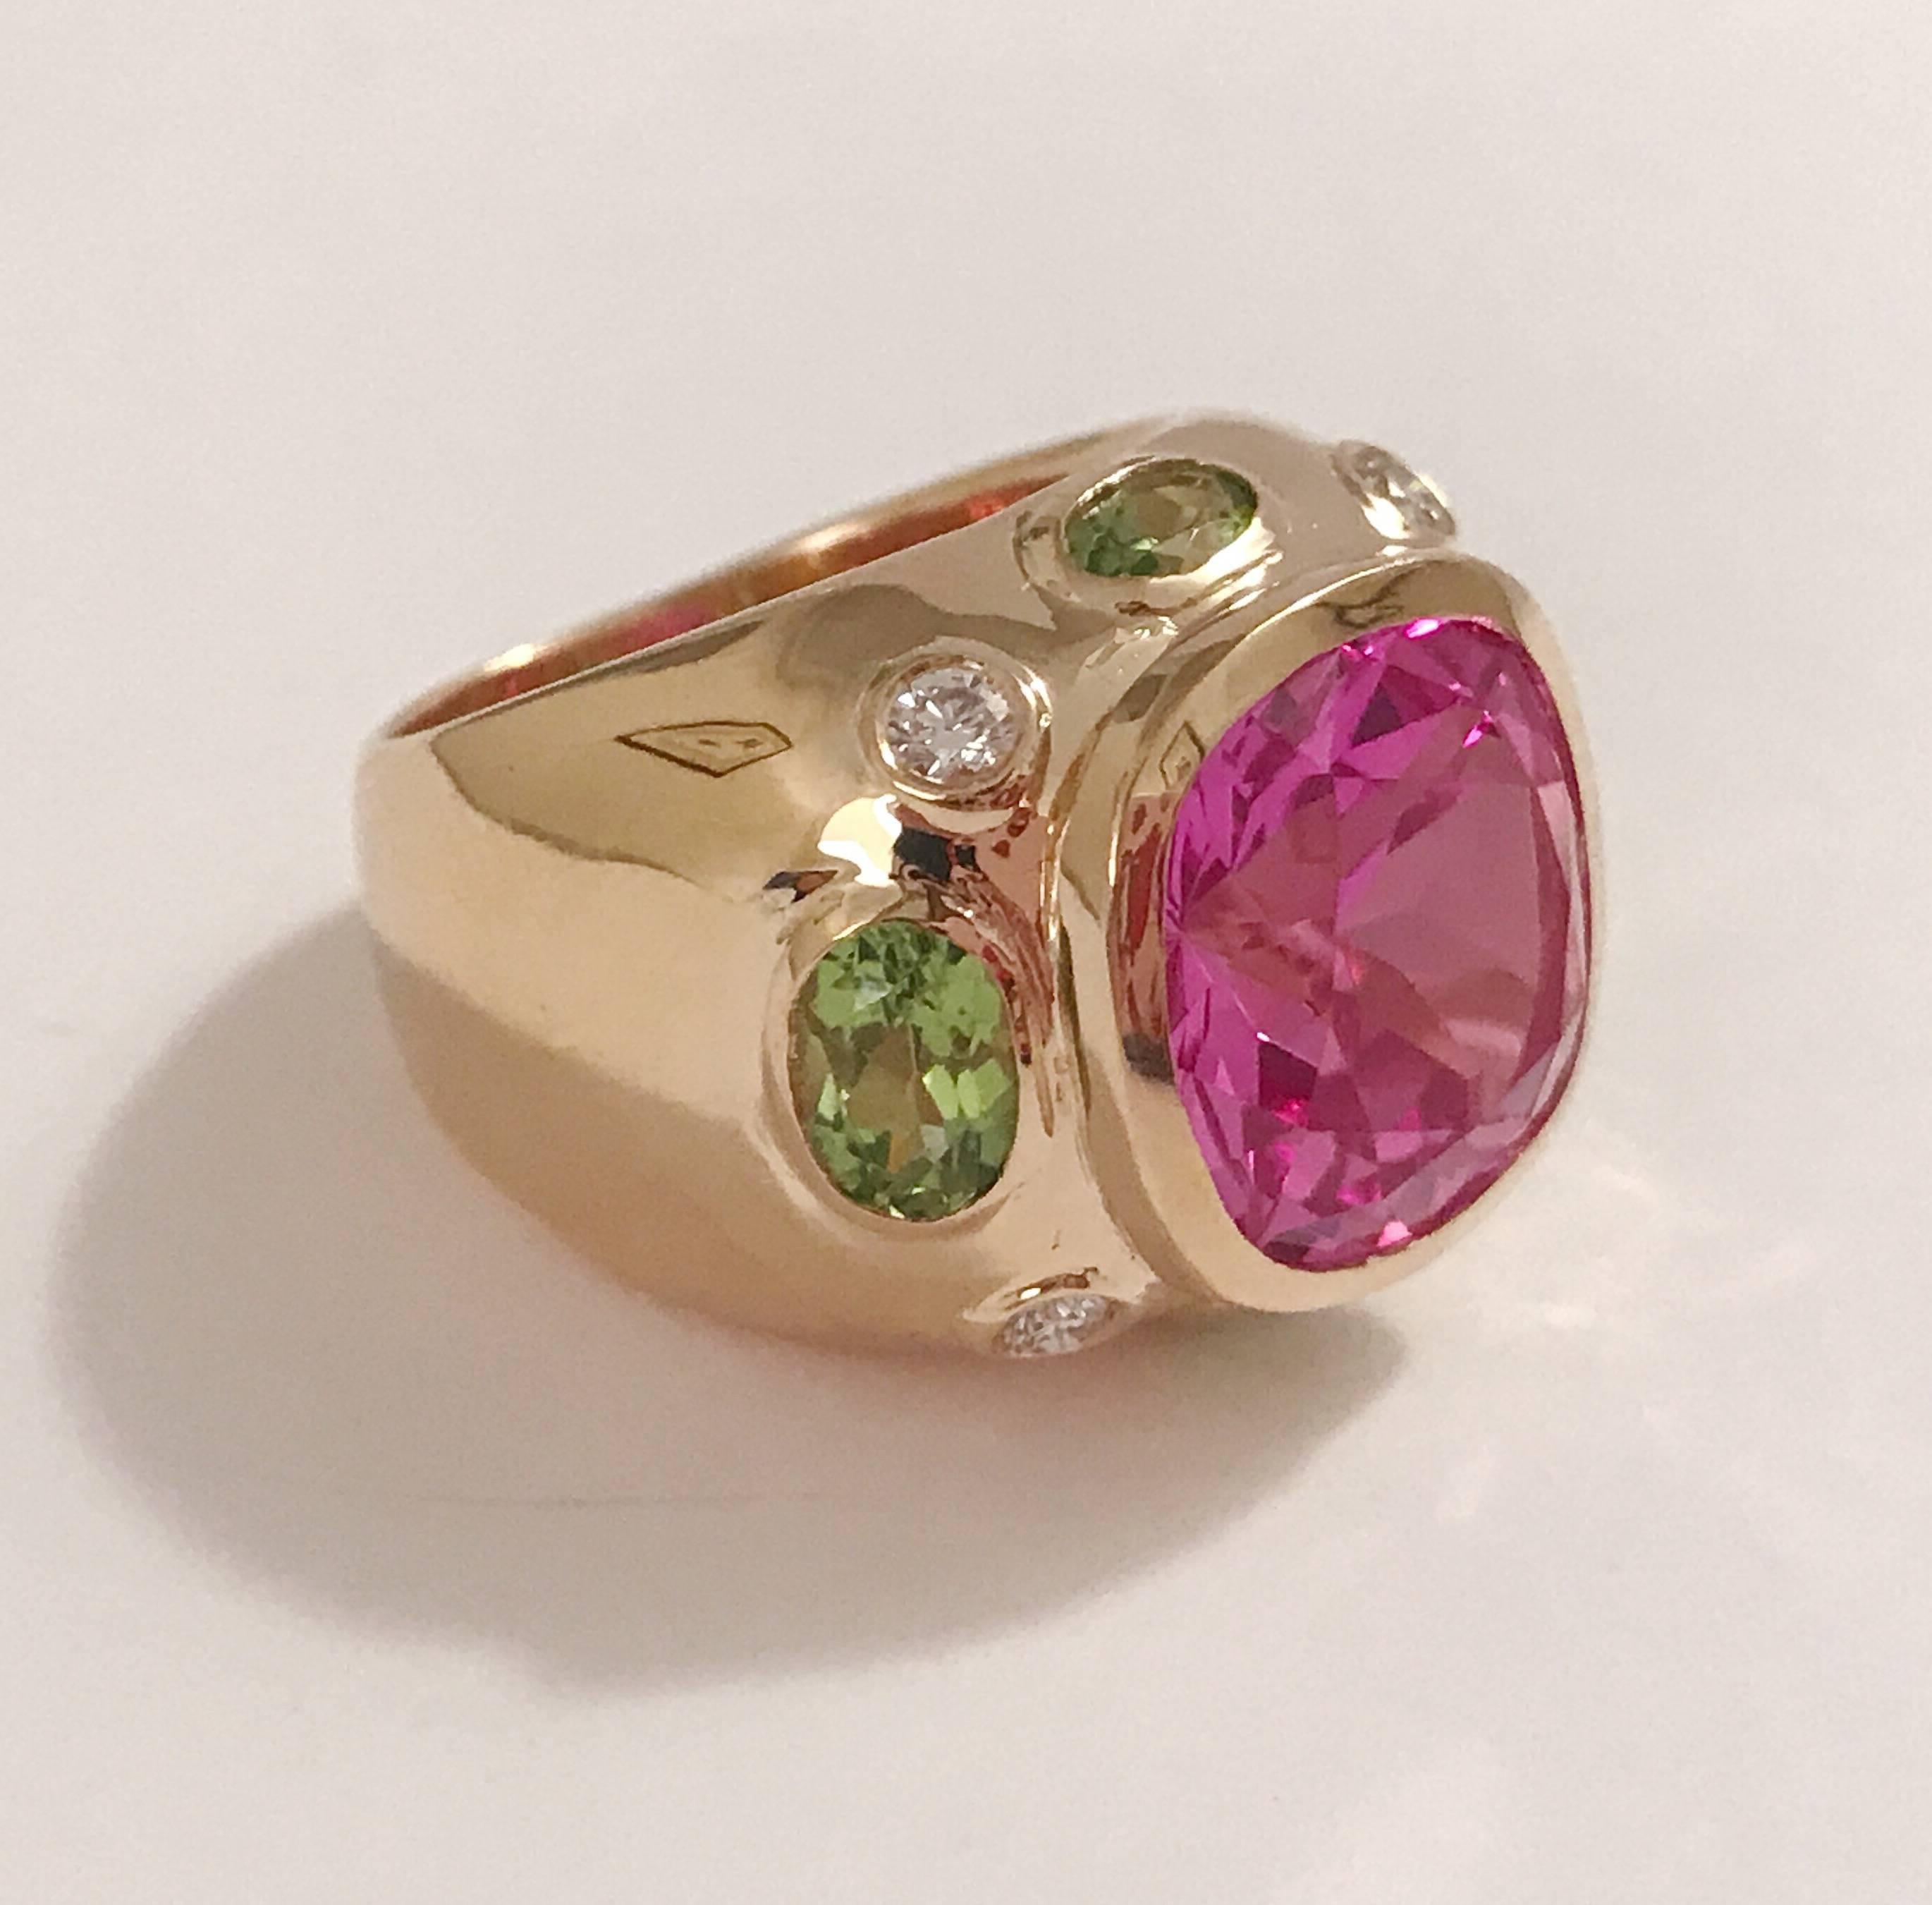 The BONHEUR Ring: 18kt Yellow Gold Domed Ring with faceted pink topaz cut center stone and faceted oval Peridots and round Diamonds. 

This ring is available in in any color stone combination.

This ring may be sized.

Please contact me with any